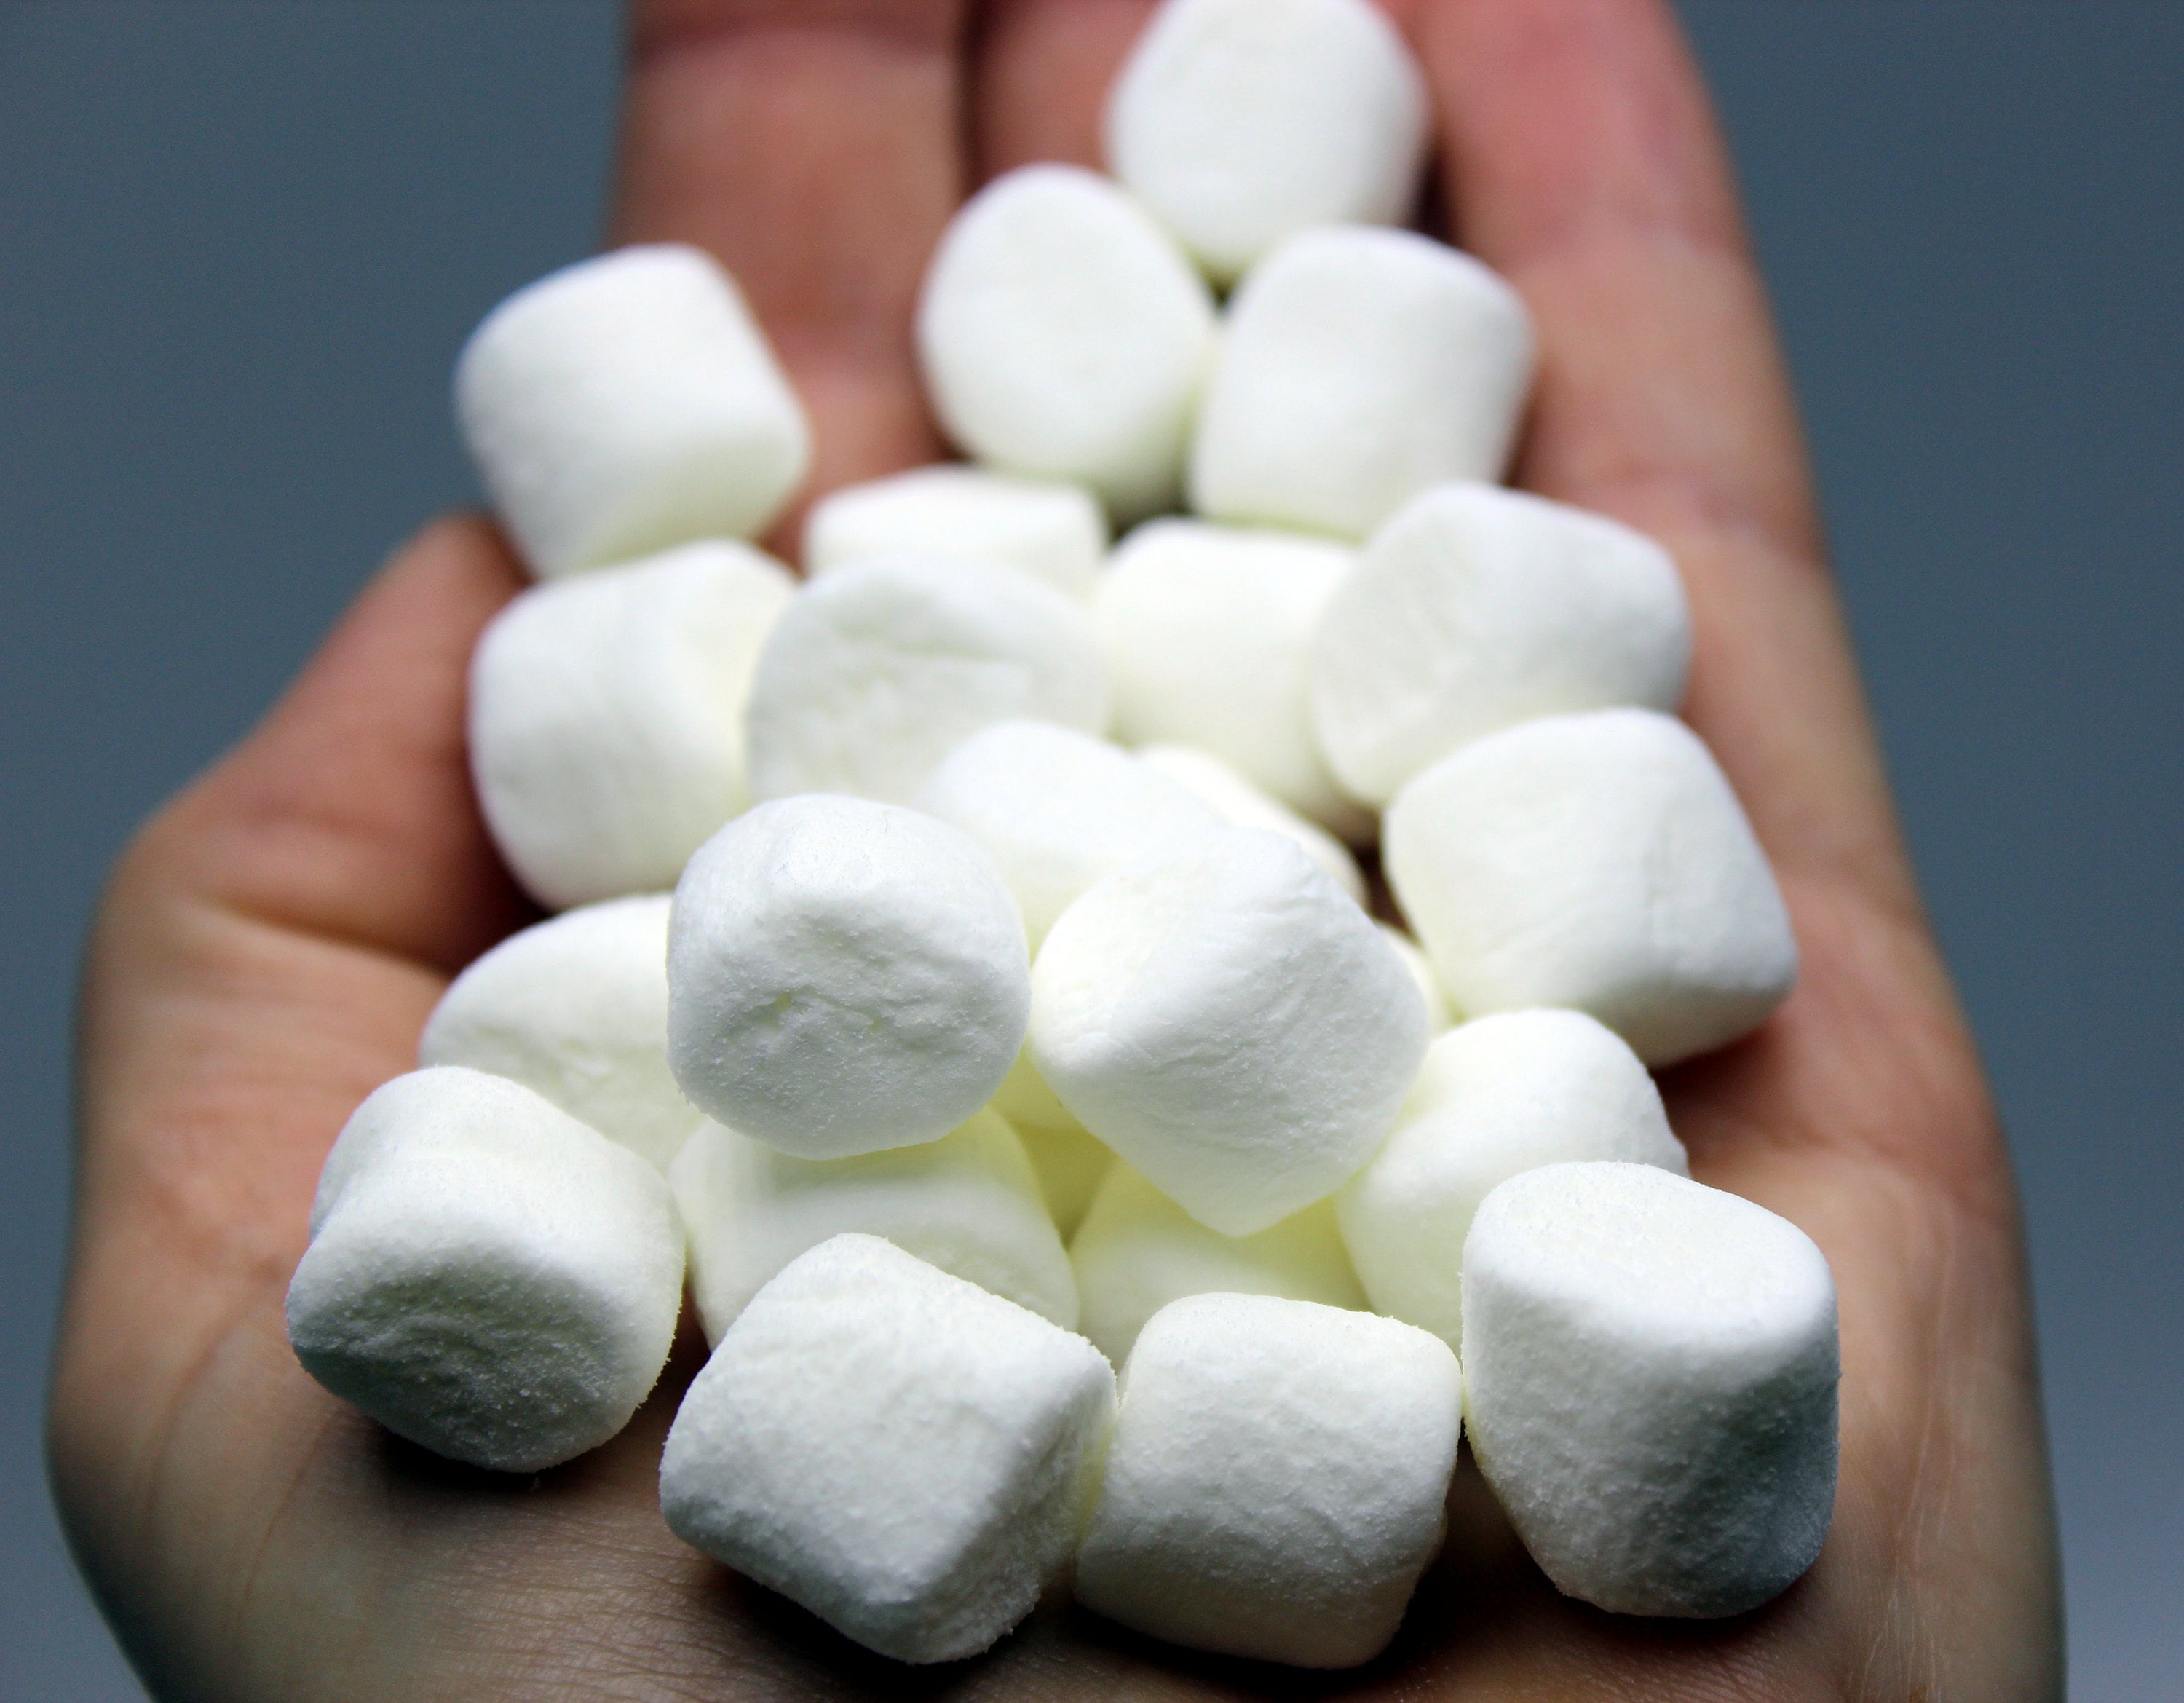 Silicone mold, Marshmallow, 55 pcs., Modeling tools of meringues and  marshmallow for home decor